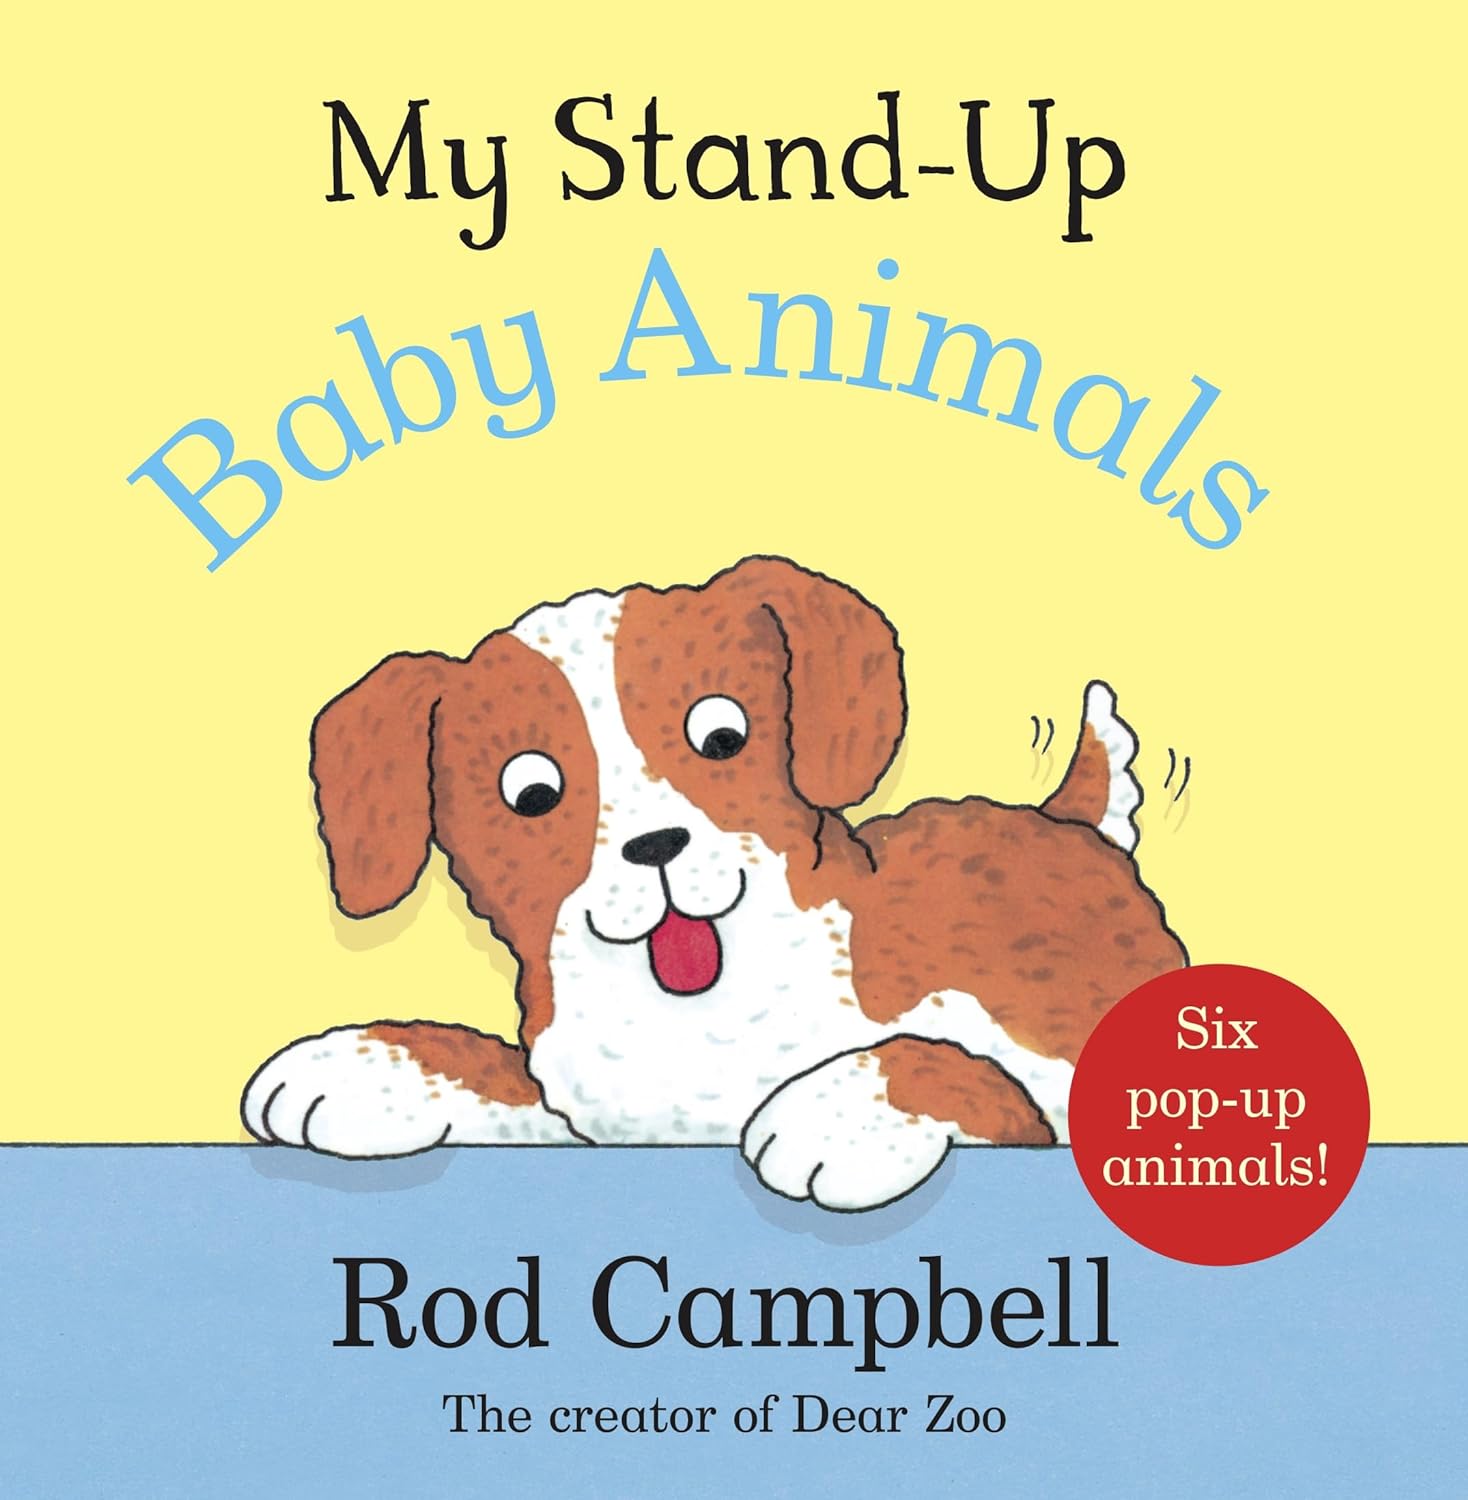 My Stand-Up Baby Animals - Board book